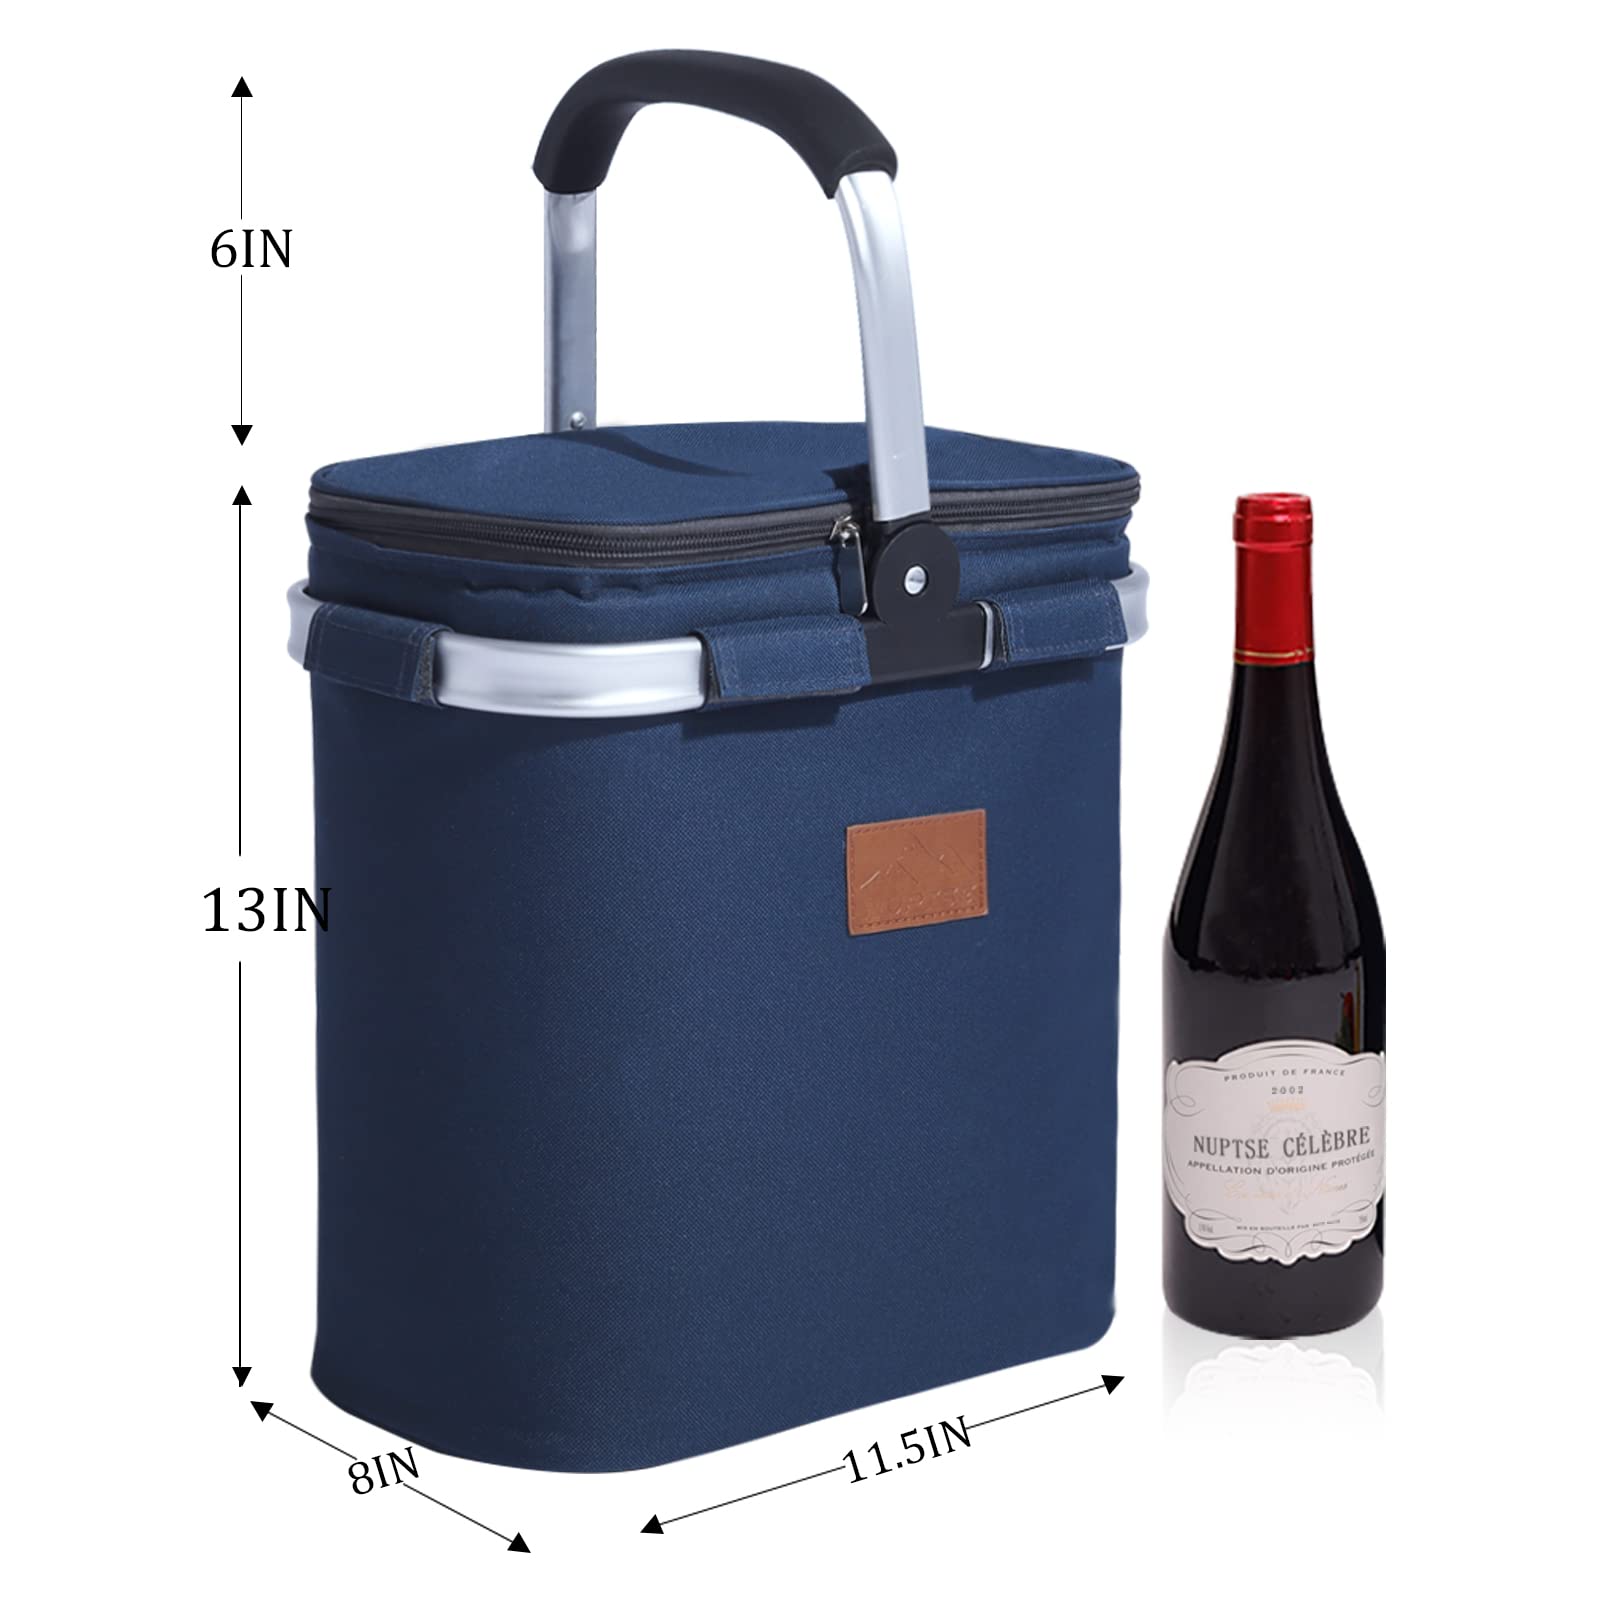 6 Bottle Wine Glass Carrier Tote Insulated & Leakproof Wine Cooler Bag with Carry Handle Wine Bags for Travel Events Beach Party Picnic Wine Gifts Halloween Gifts